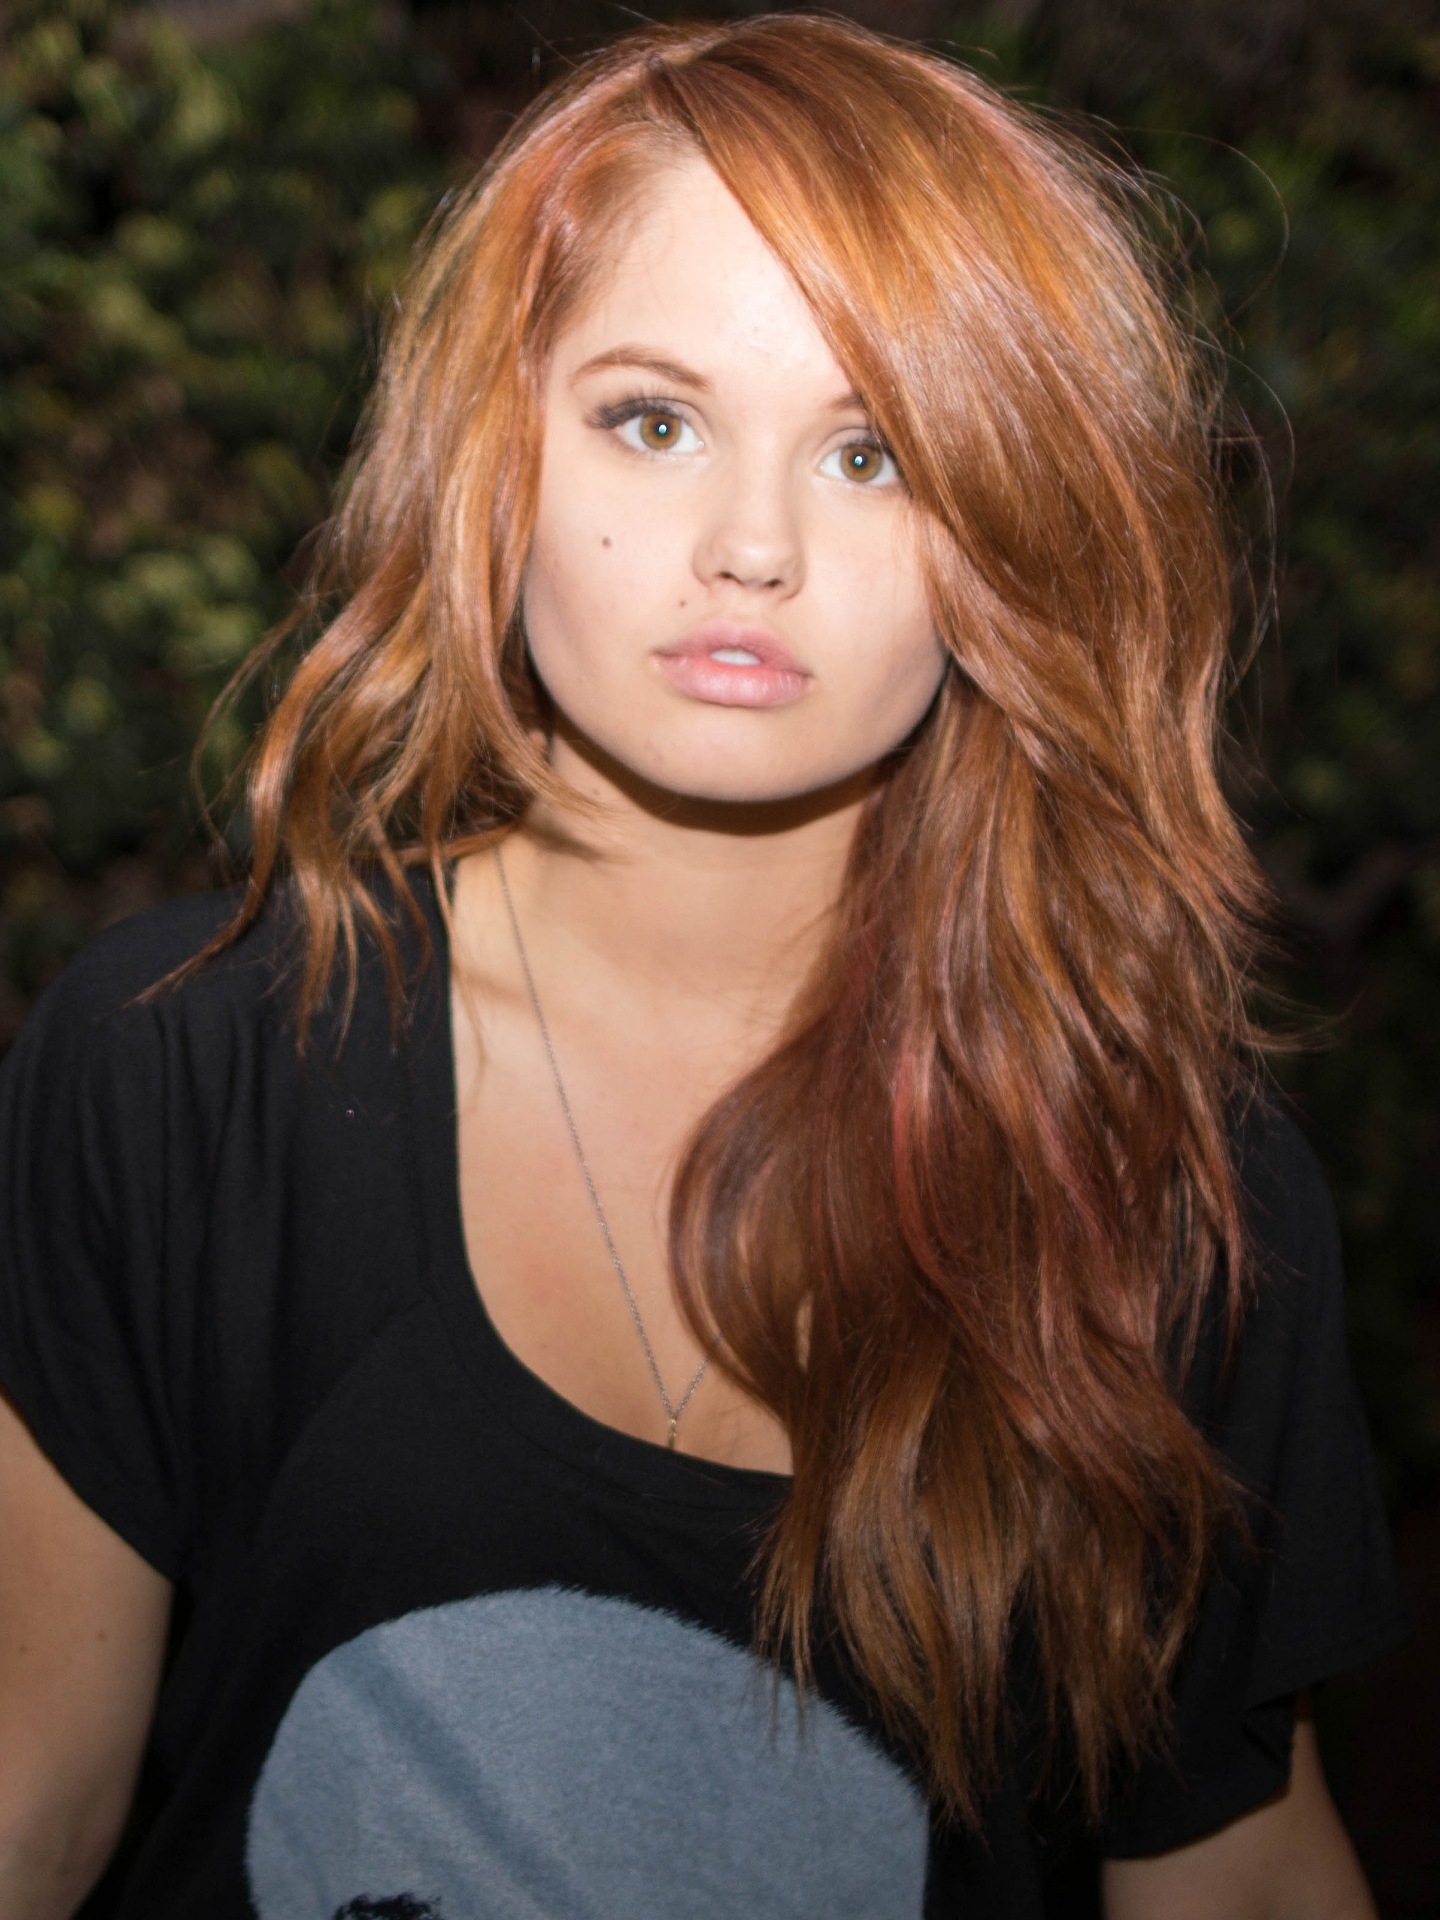 1440x1920 Debby Ryan Images 1440x1920 Resolution Wallpaper Hd Celebrities 4k Wallpapers Images 